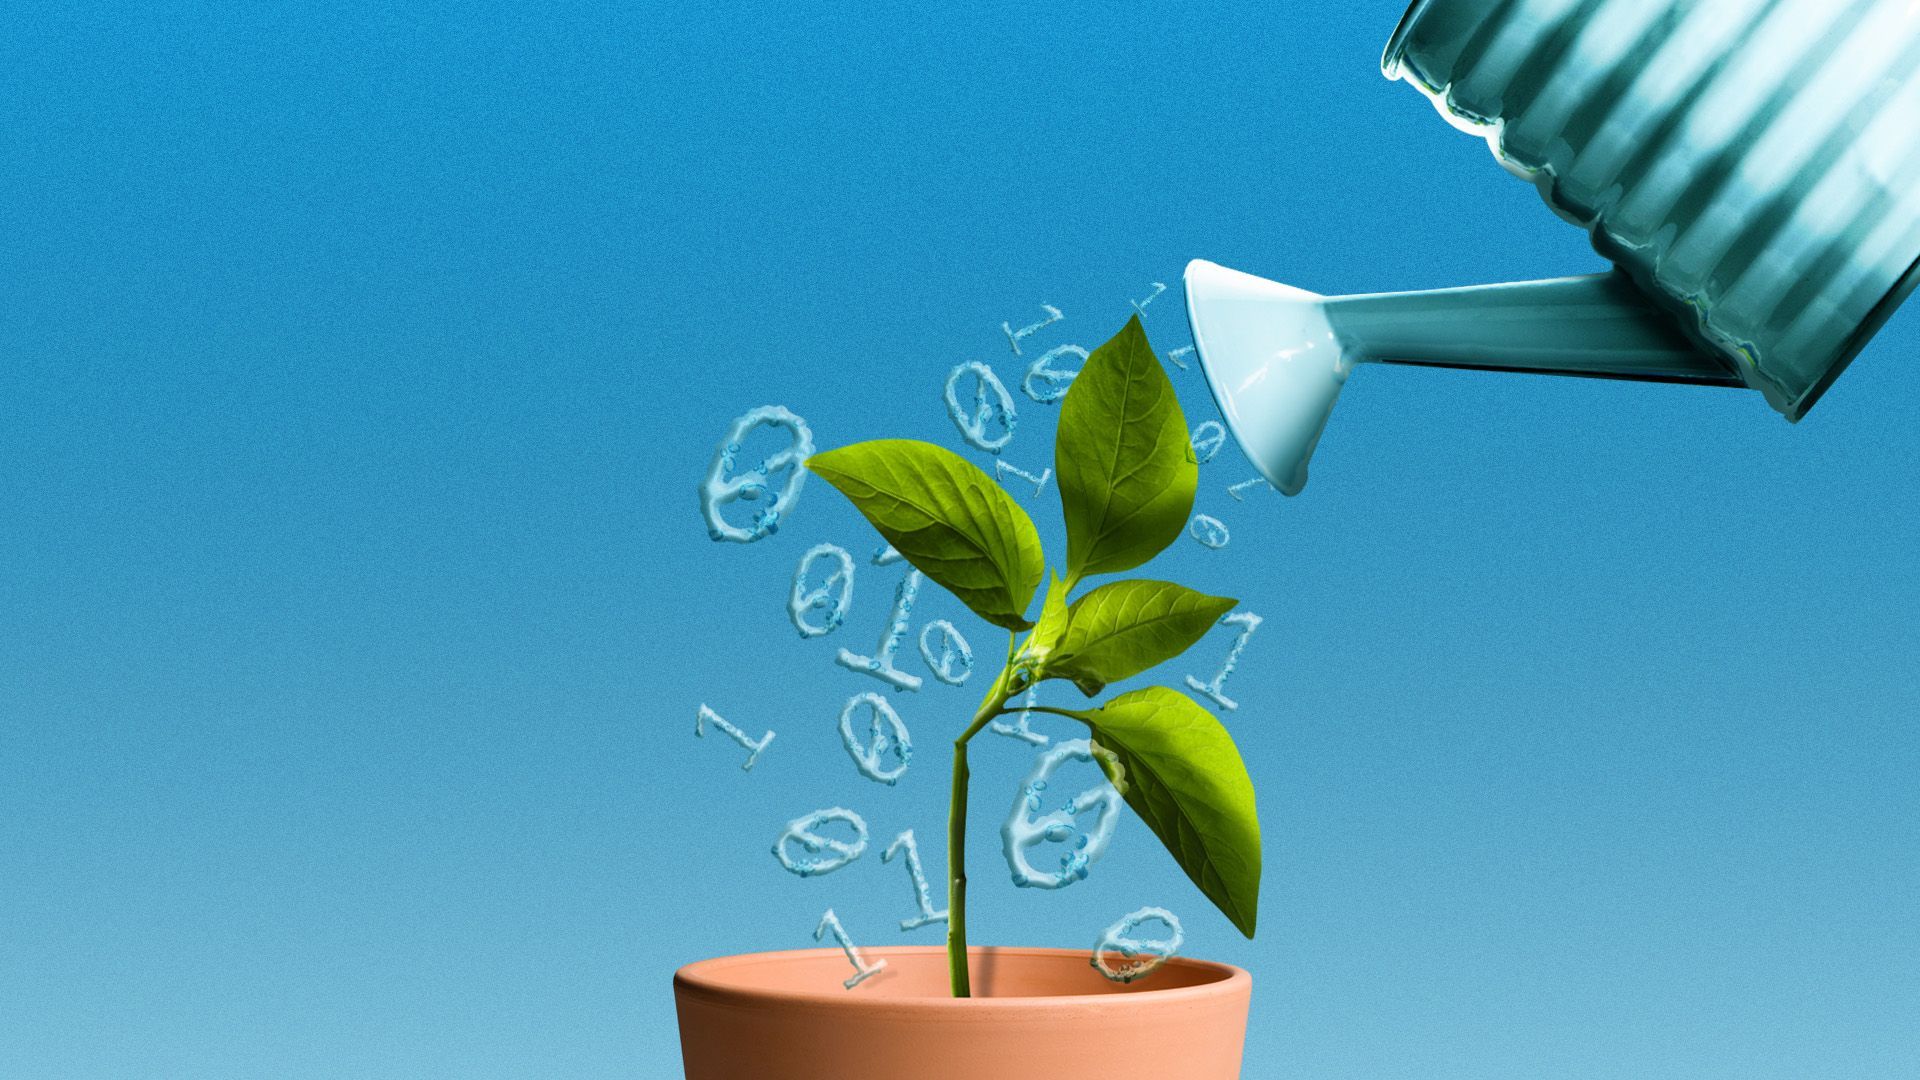 Illustration of a watering can watering binary code water droplets onto a tilted over little plant